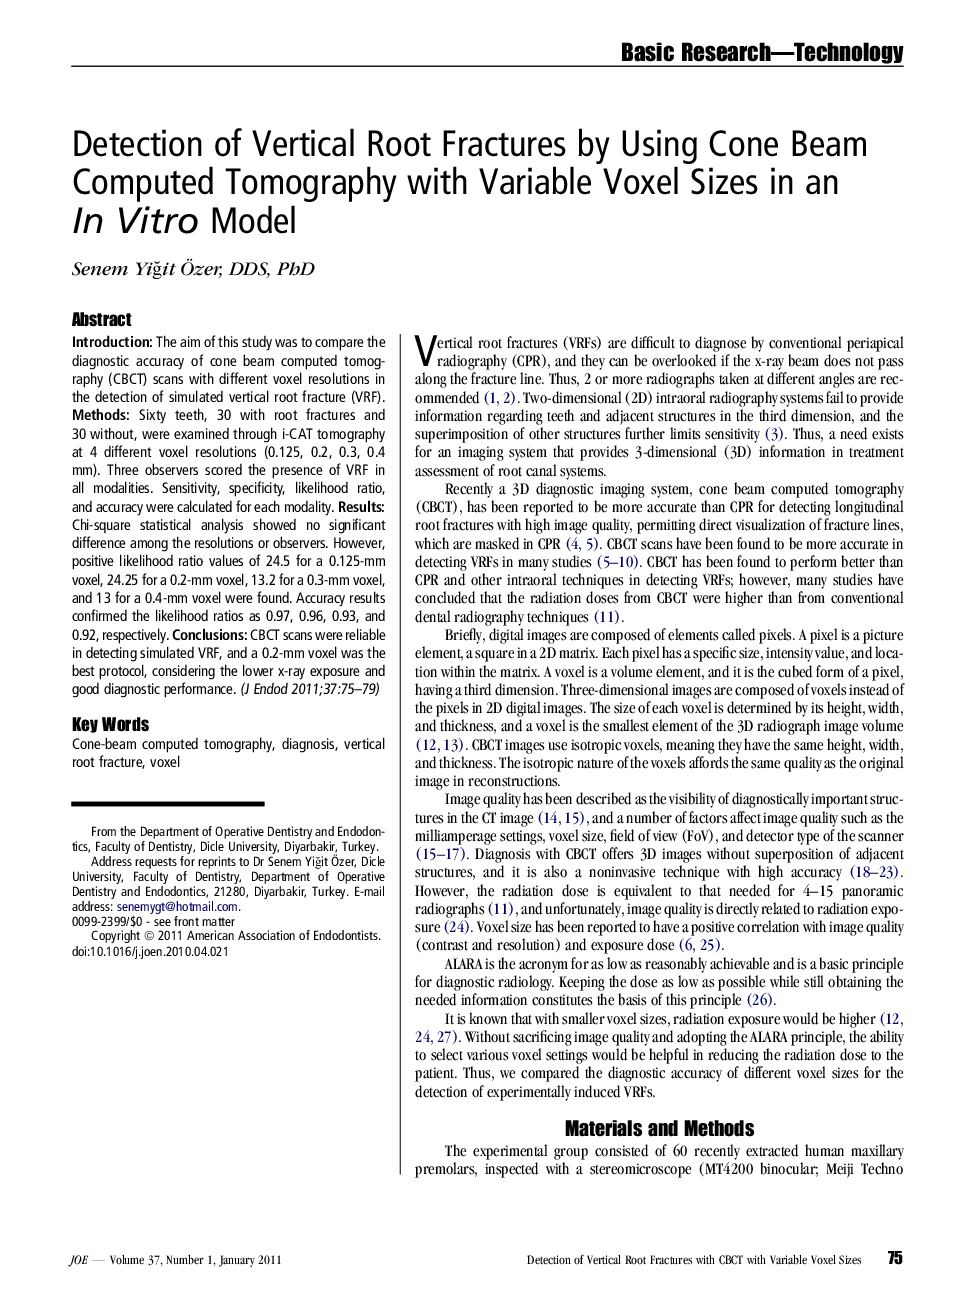 Detection of Vertical Root Fractures by Using Cone Beam Computed Tomography with Variable Voxel Sizes in an InÂ Vitro Model